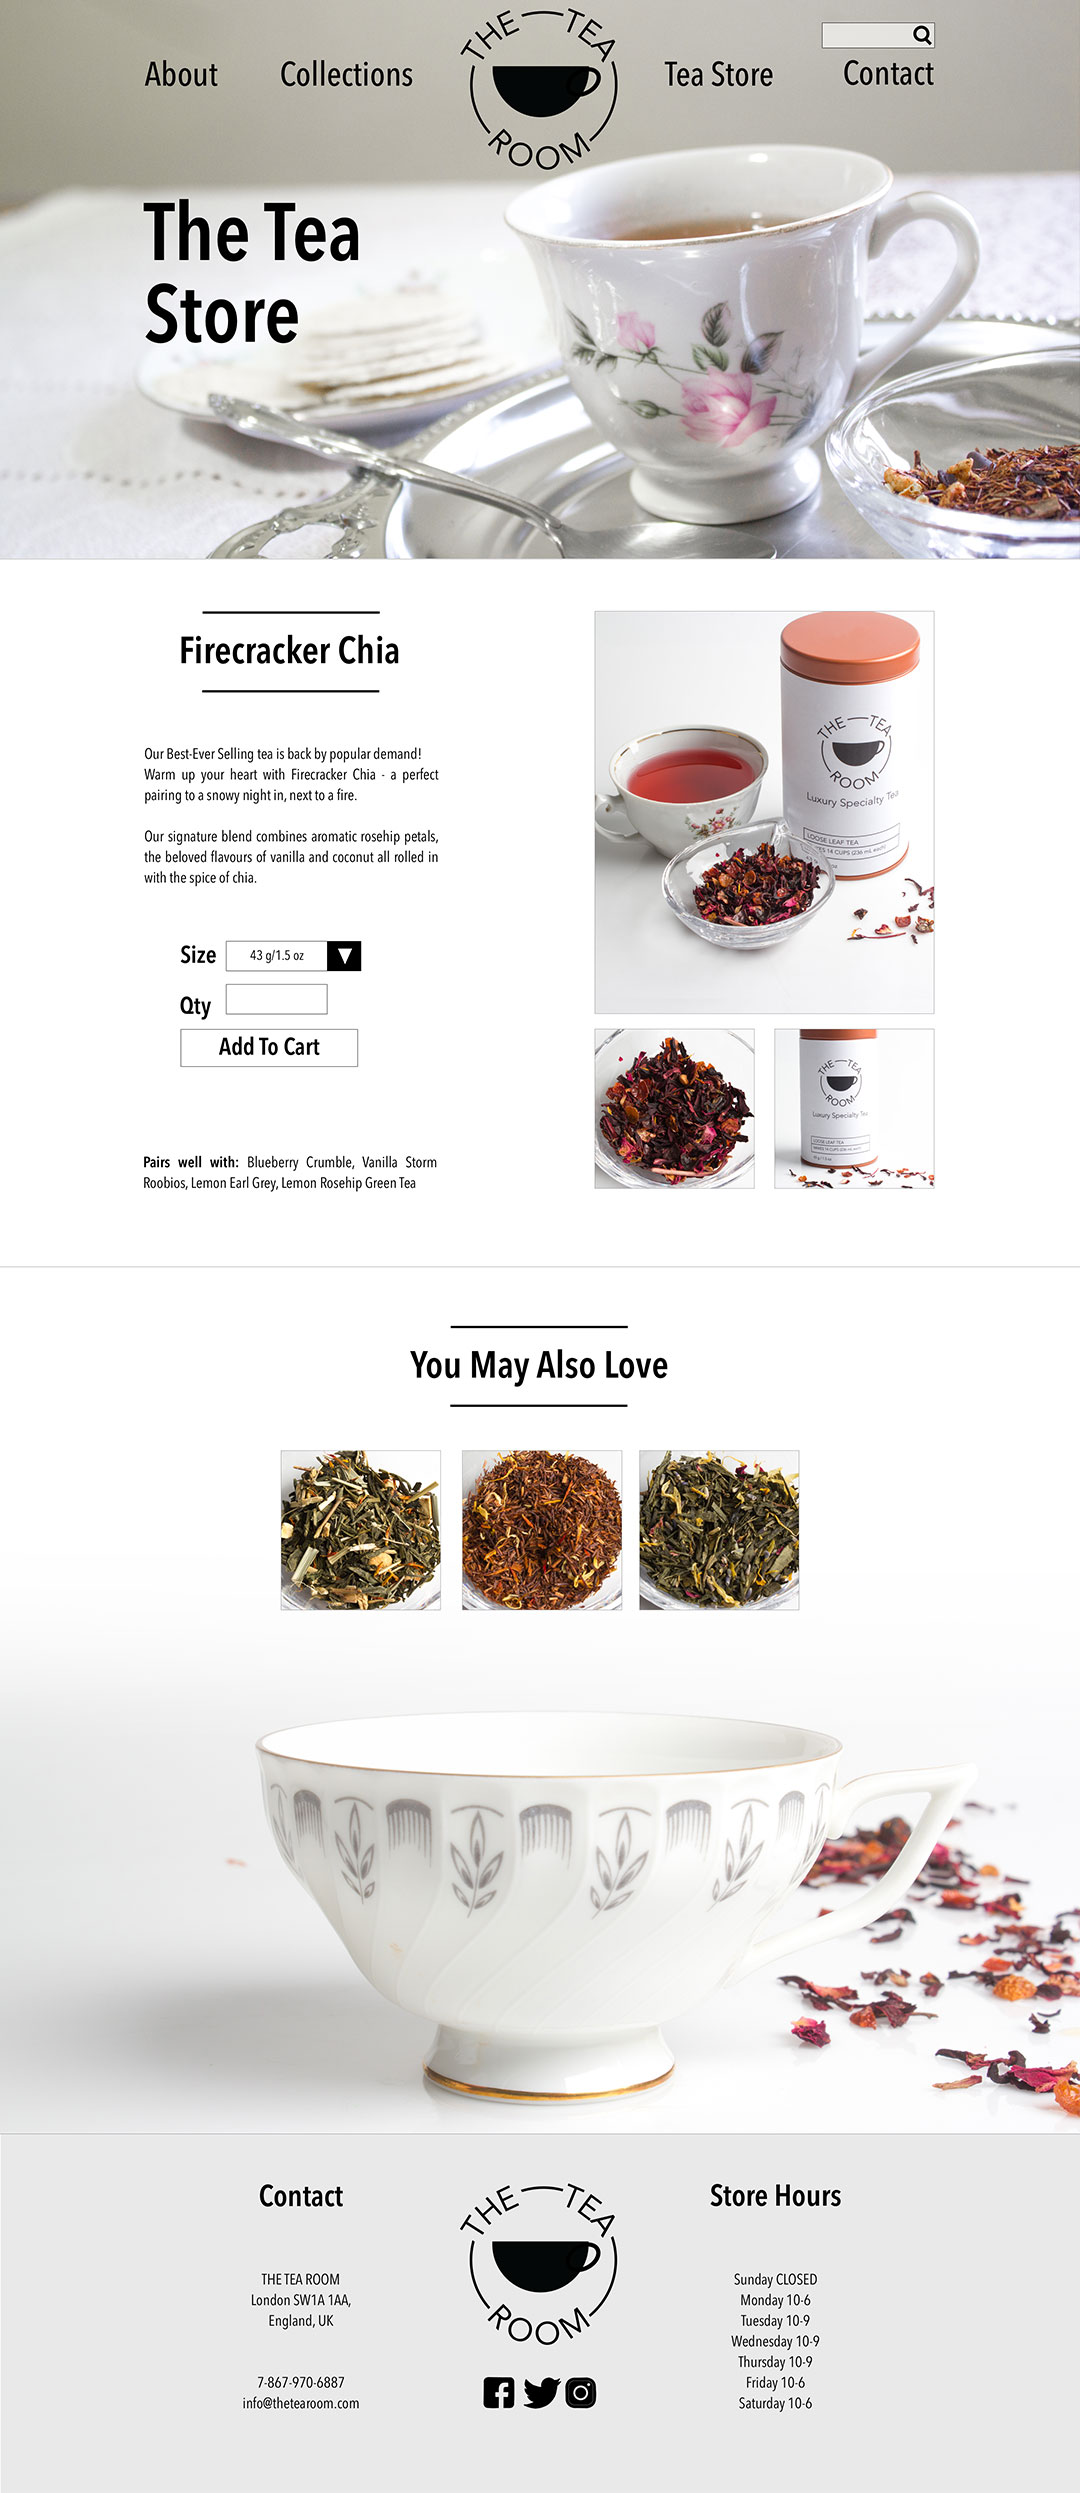 The Tea Room Product Page